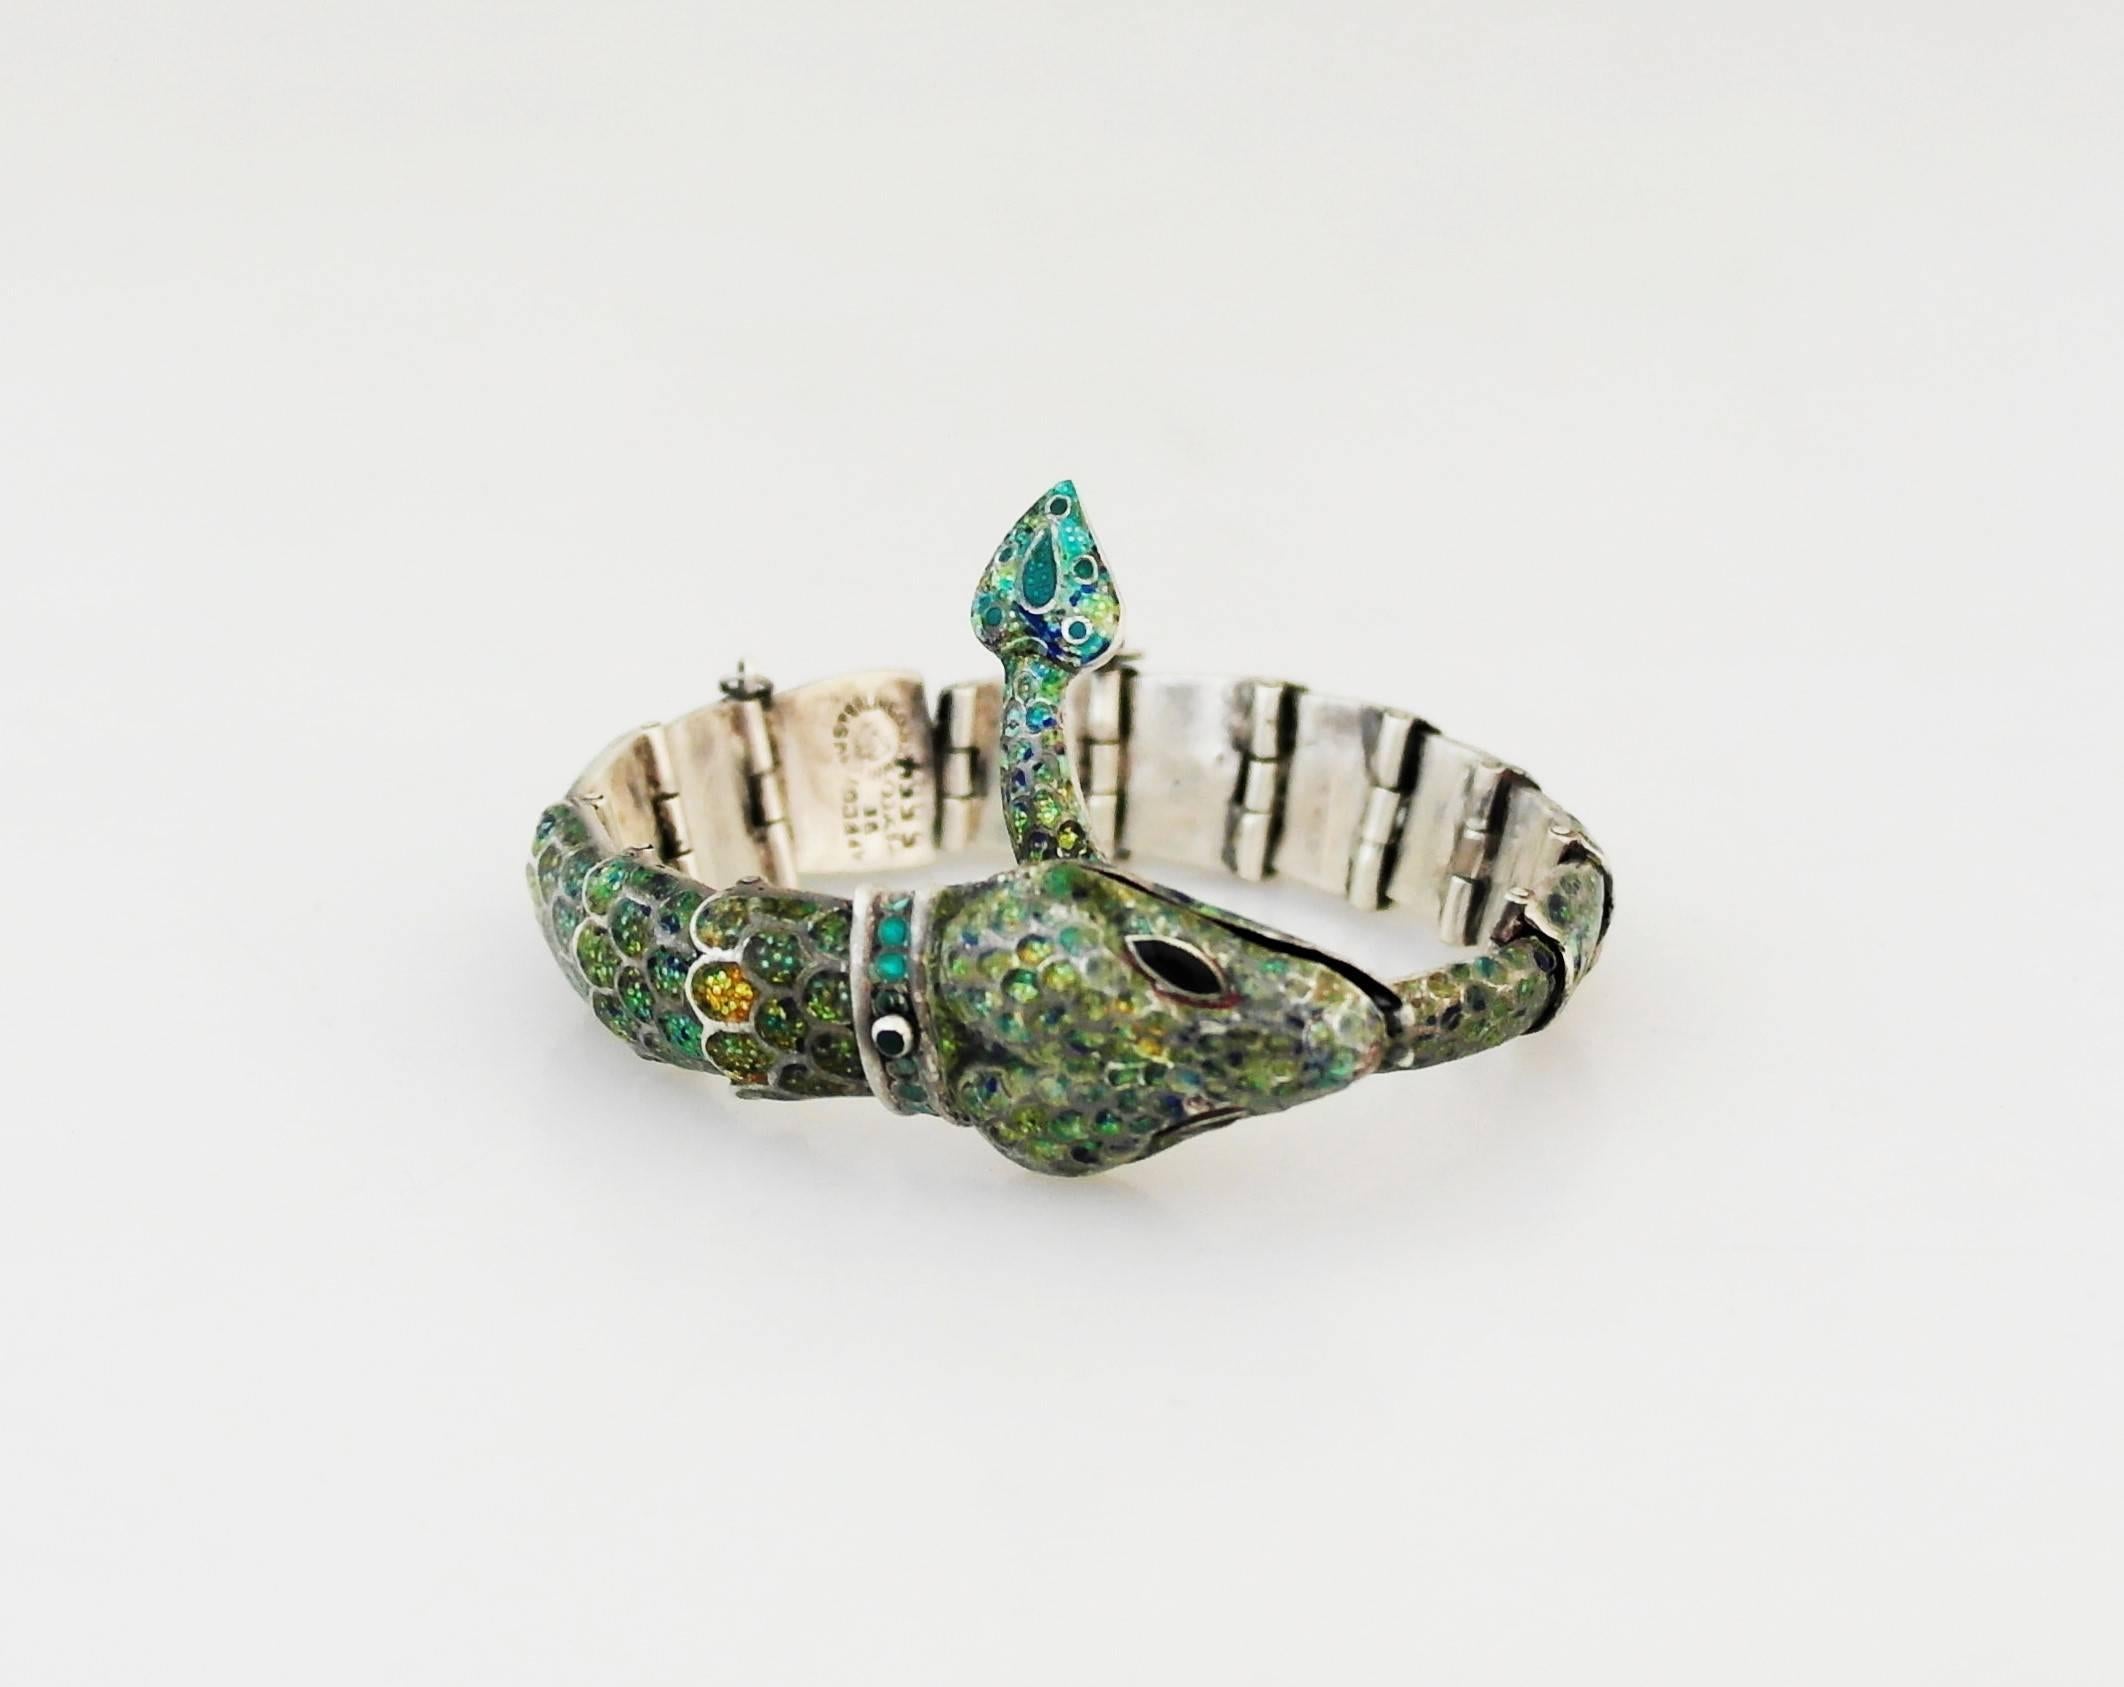 Being offered is a sterling silver bracelet by Margot Van Voorhies Carr of Taxco, Mexico. Comprising a bracelet in her snake motif, articulated in a spectrum of iridescent colors. Dimensions: Necklace - 9 1/2